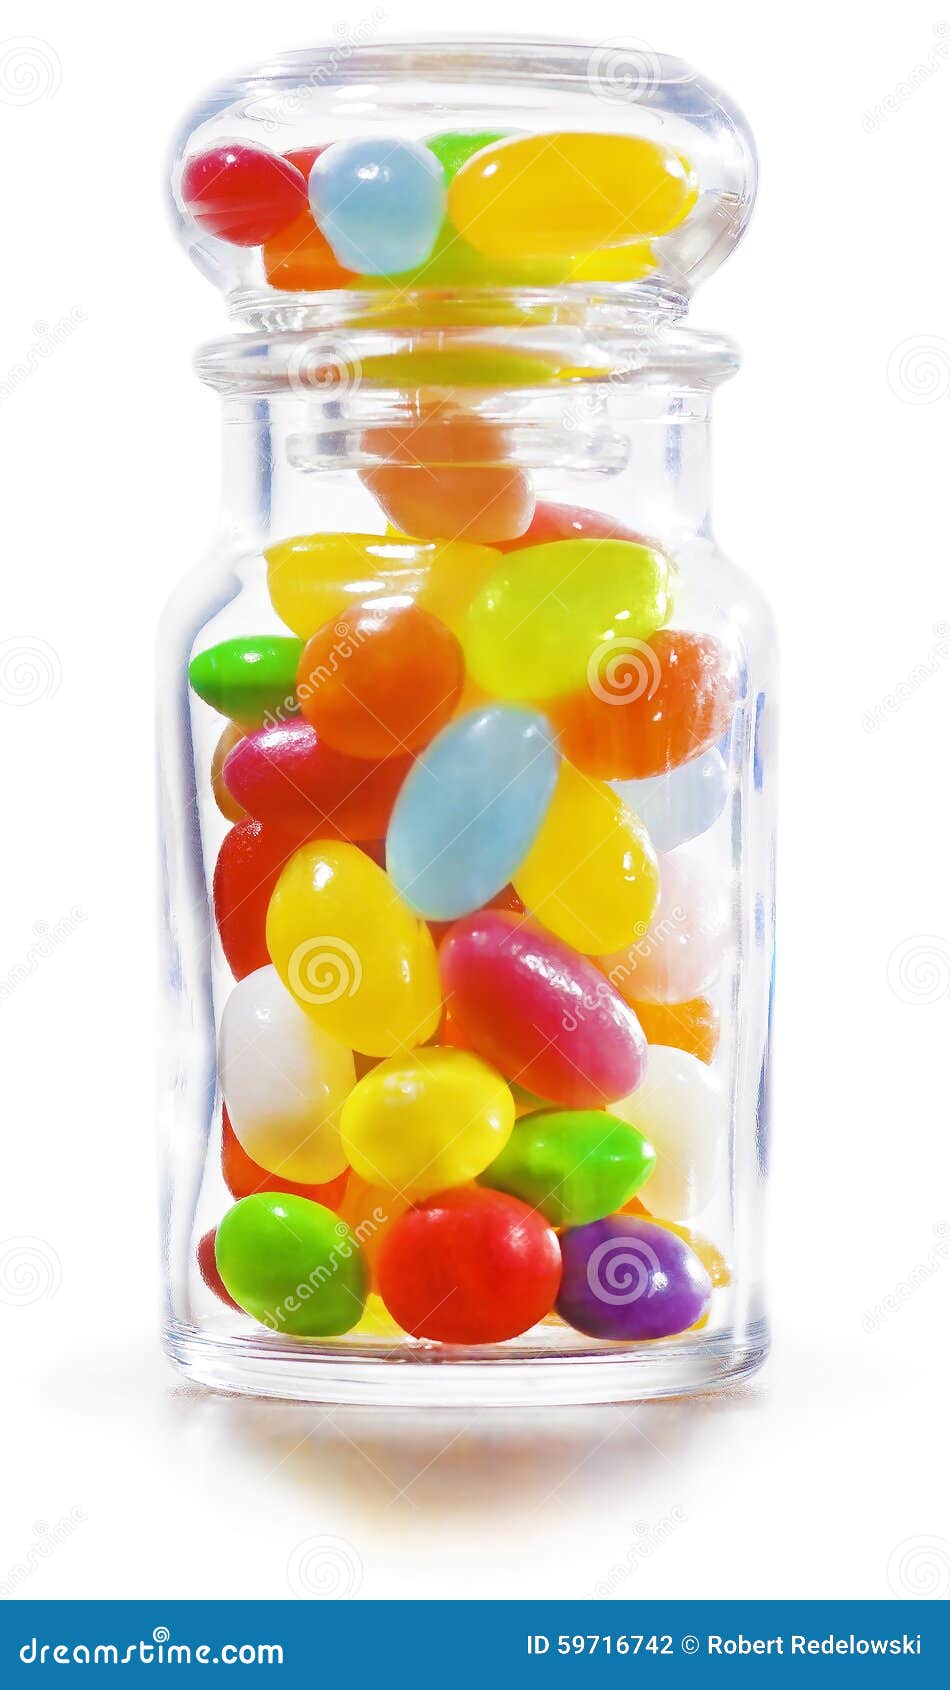 Jelly Beans stock photo. Image of confectionery, dessert - 59716742